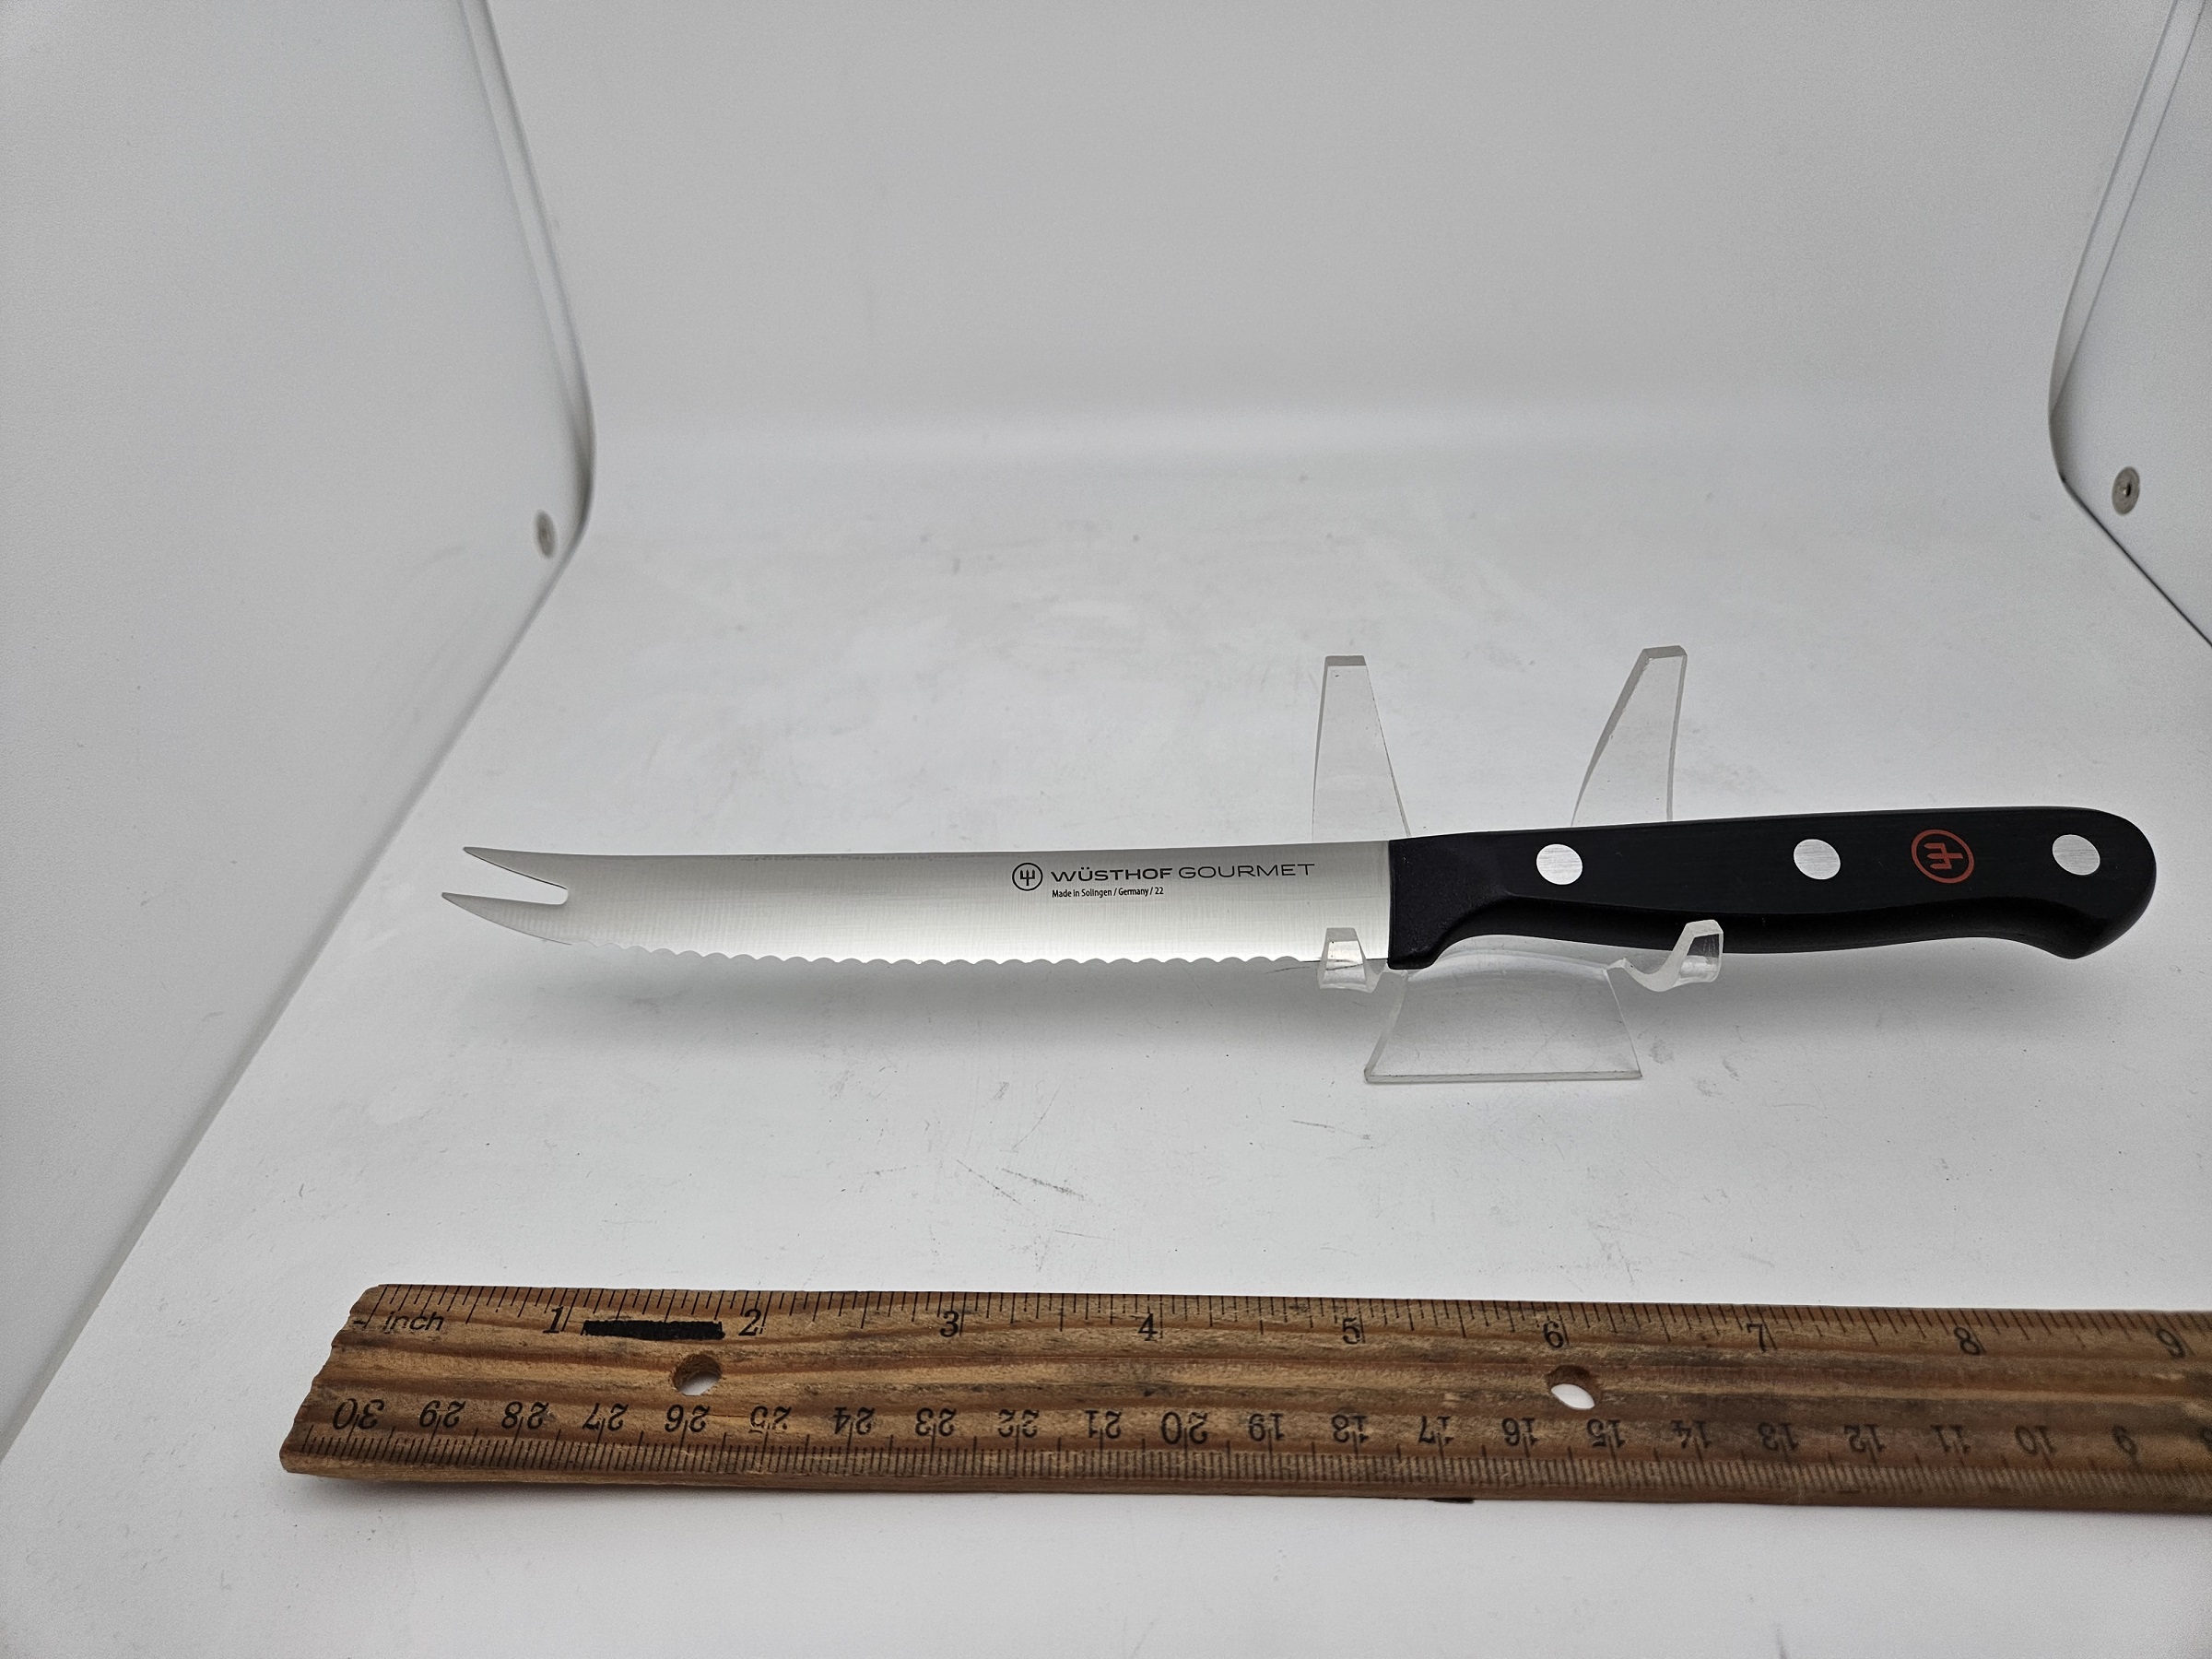 Wusthof Germany - Classic - Cheese Knife - 1040132714 - kitchen knives